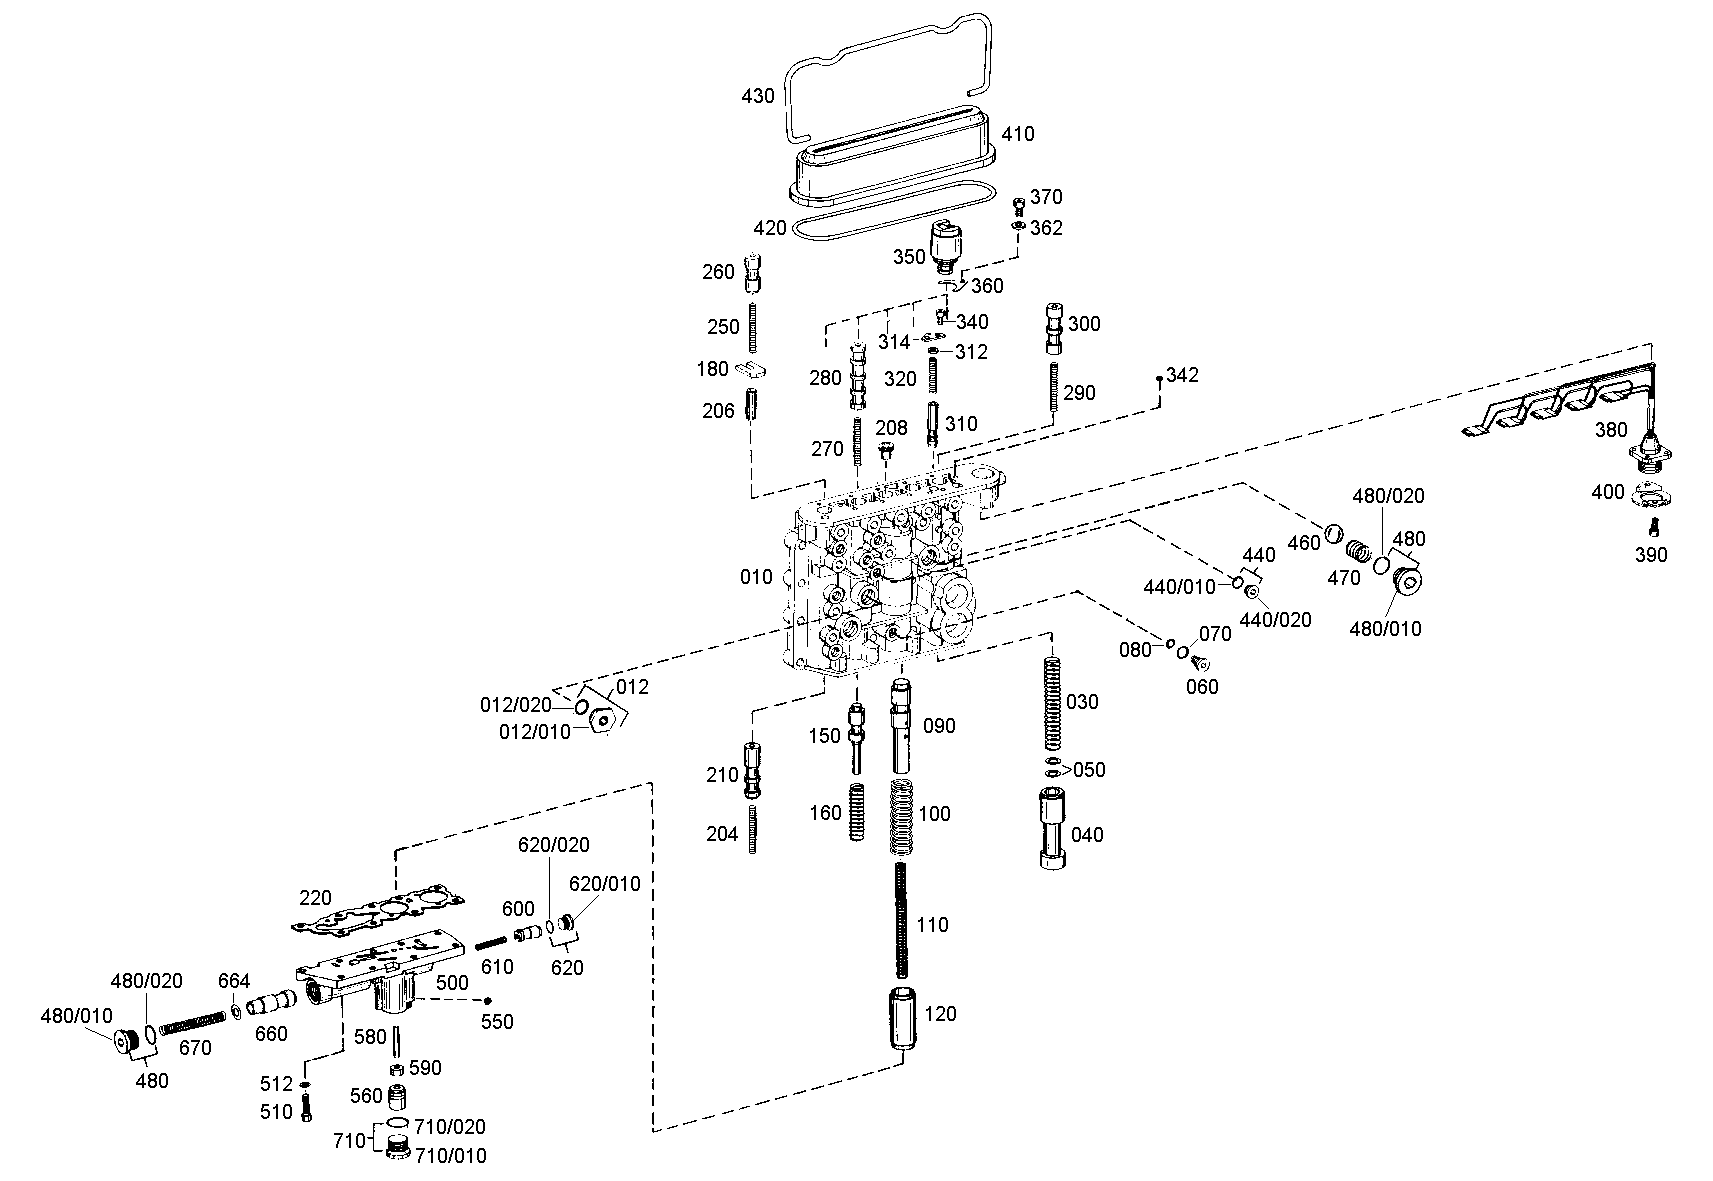 drawing for BEISSBARTH & MUELLER GMBH & CO. 15268828 - REDUCTION VALVE (figure 2)